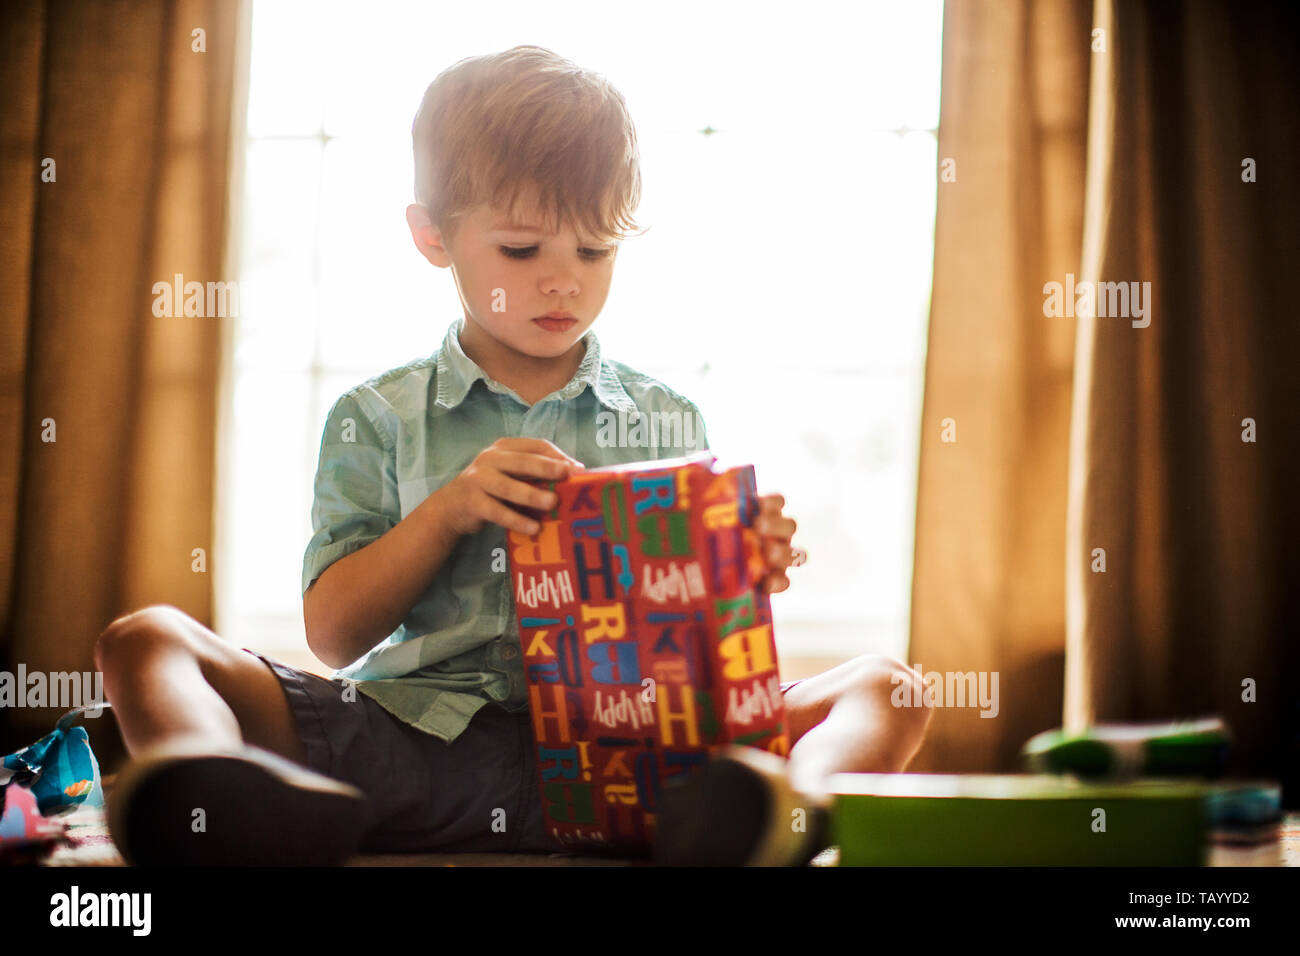 Young boy opening birthday presents. Stock Photo